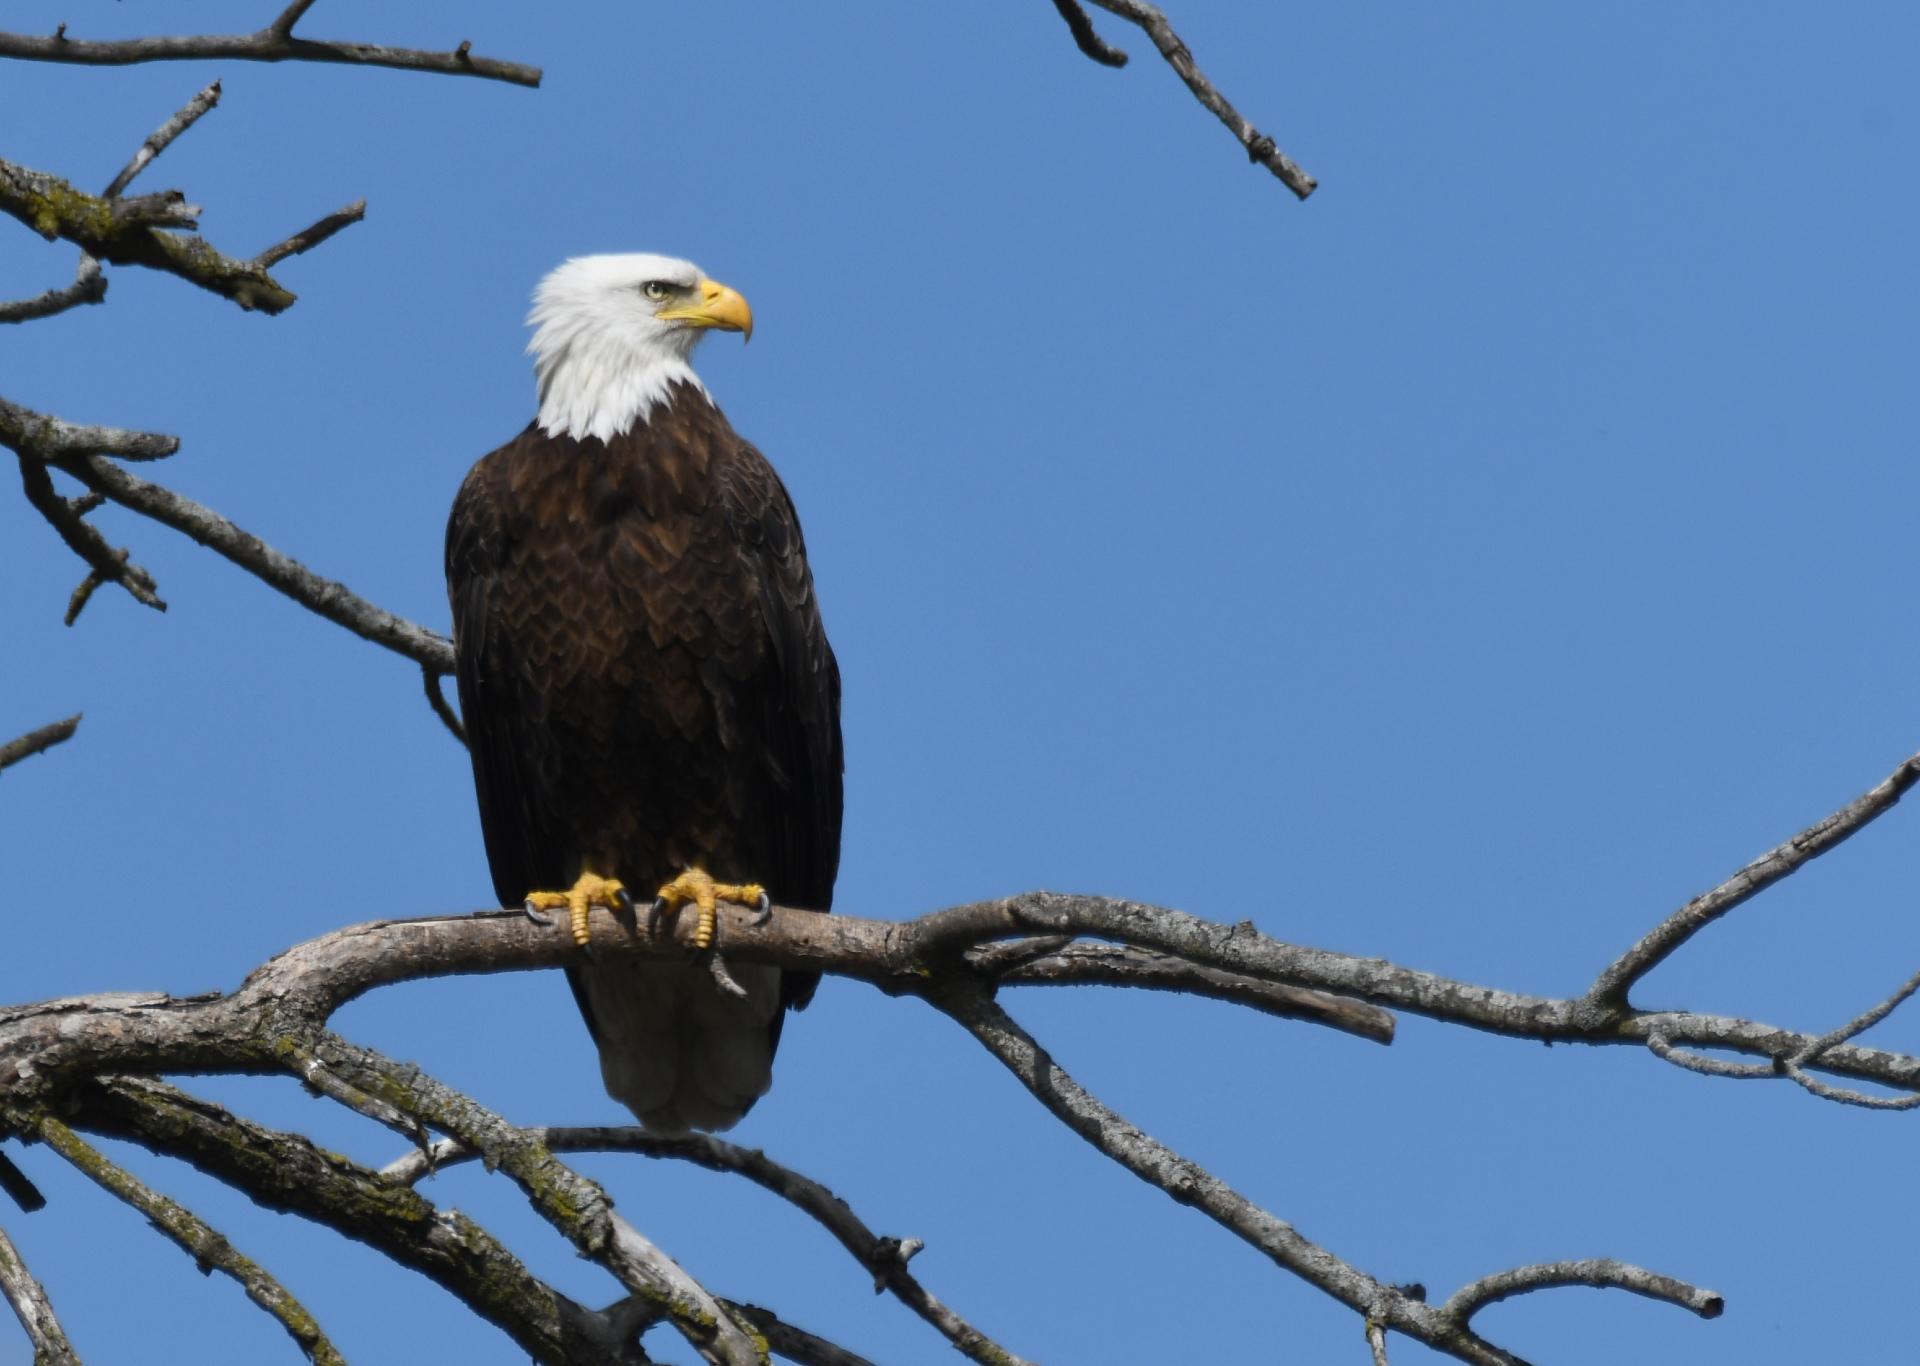 The Forest Preserve District of Will County’s “Eagle Watch” is set for 11 a.m. to -3 p.m. Saturday, Jan. 8, at Four Rivers Environmental Education Center in Channahon. (Photo by Forest Preserve staff / Chad Merda)